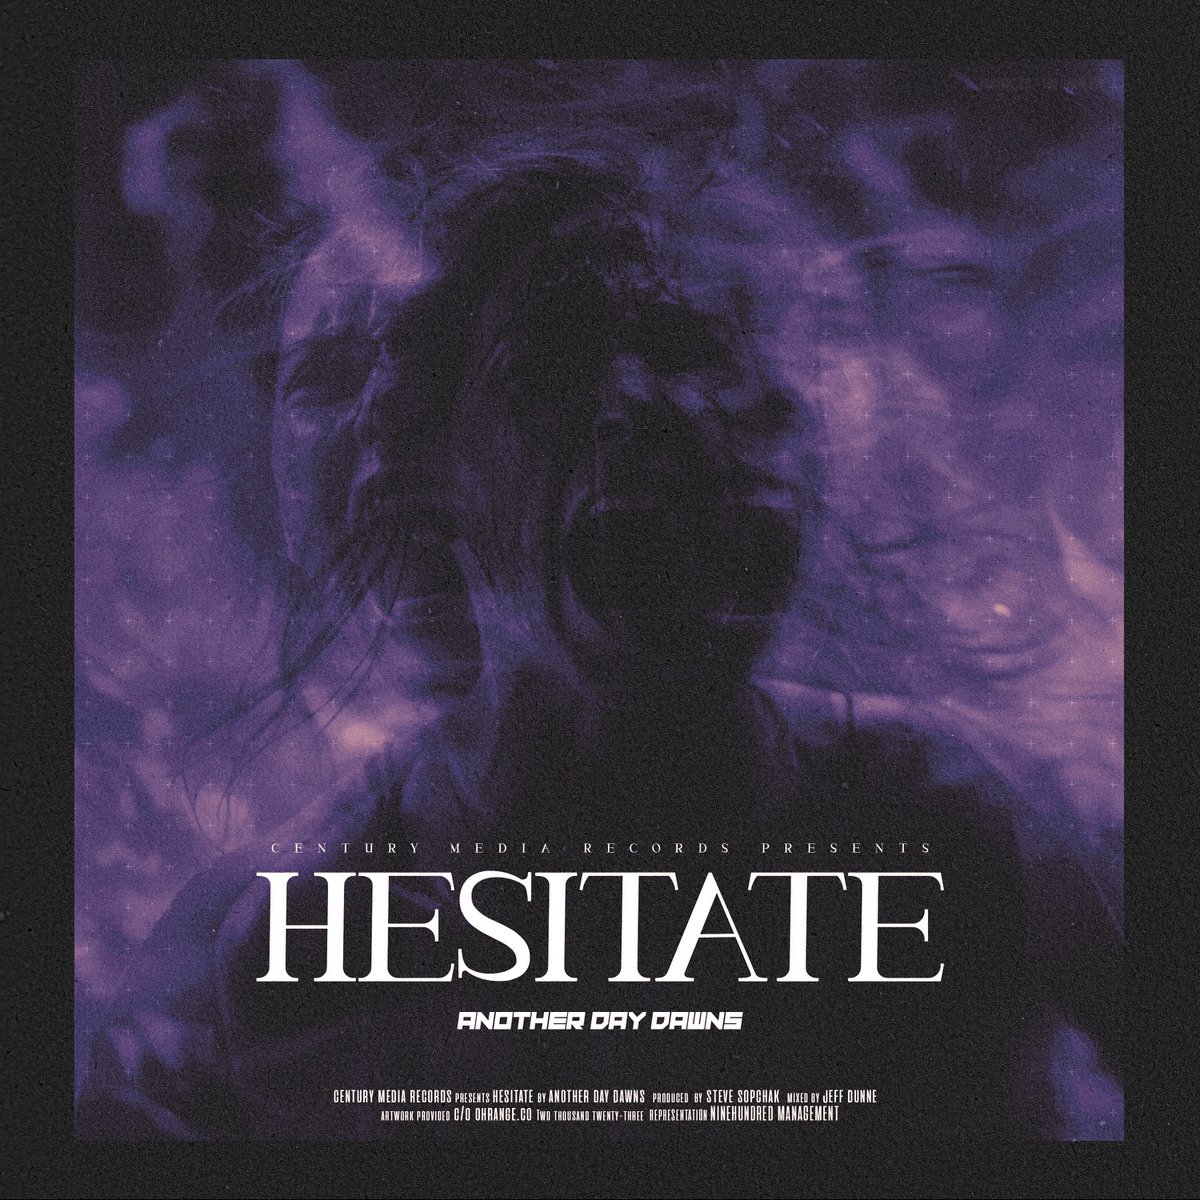 Hesitate is now on ALL streaming platforms. What do you think of the new track? Comment below! See you all in Ventura, CA tonight! 👇 #HardRock #metal #anotherdaydawns